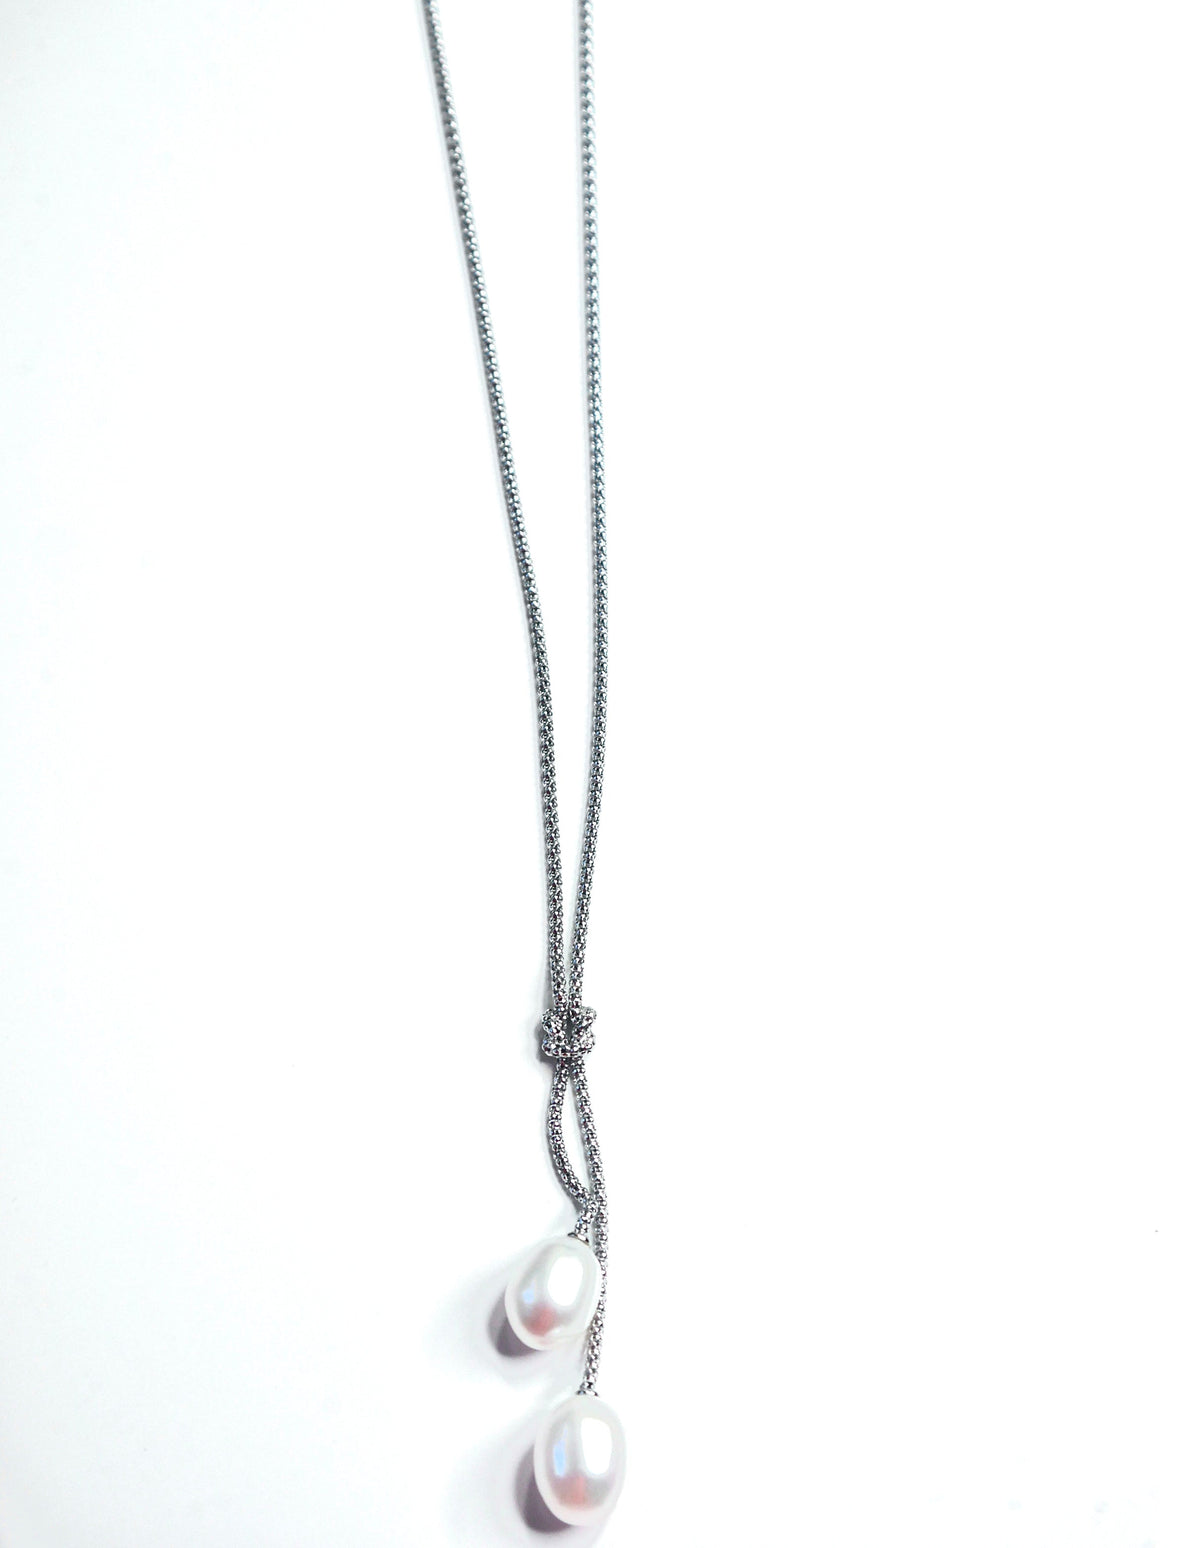 Knotted Pearl Lariat Silver Necklace, Freshwater Pearls Luxe 925 Sterling Silver Necklace